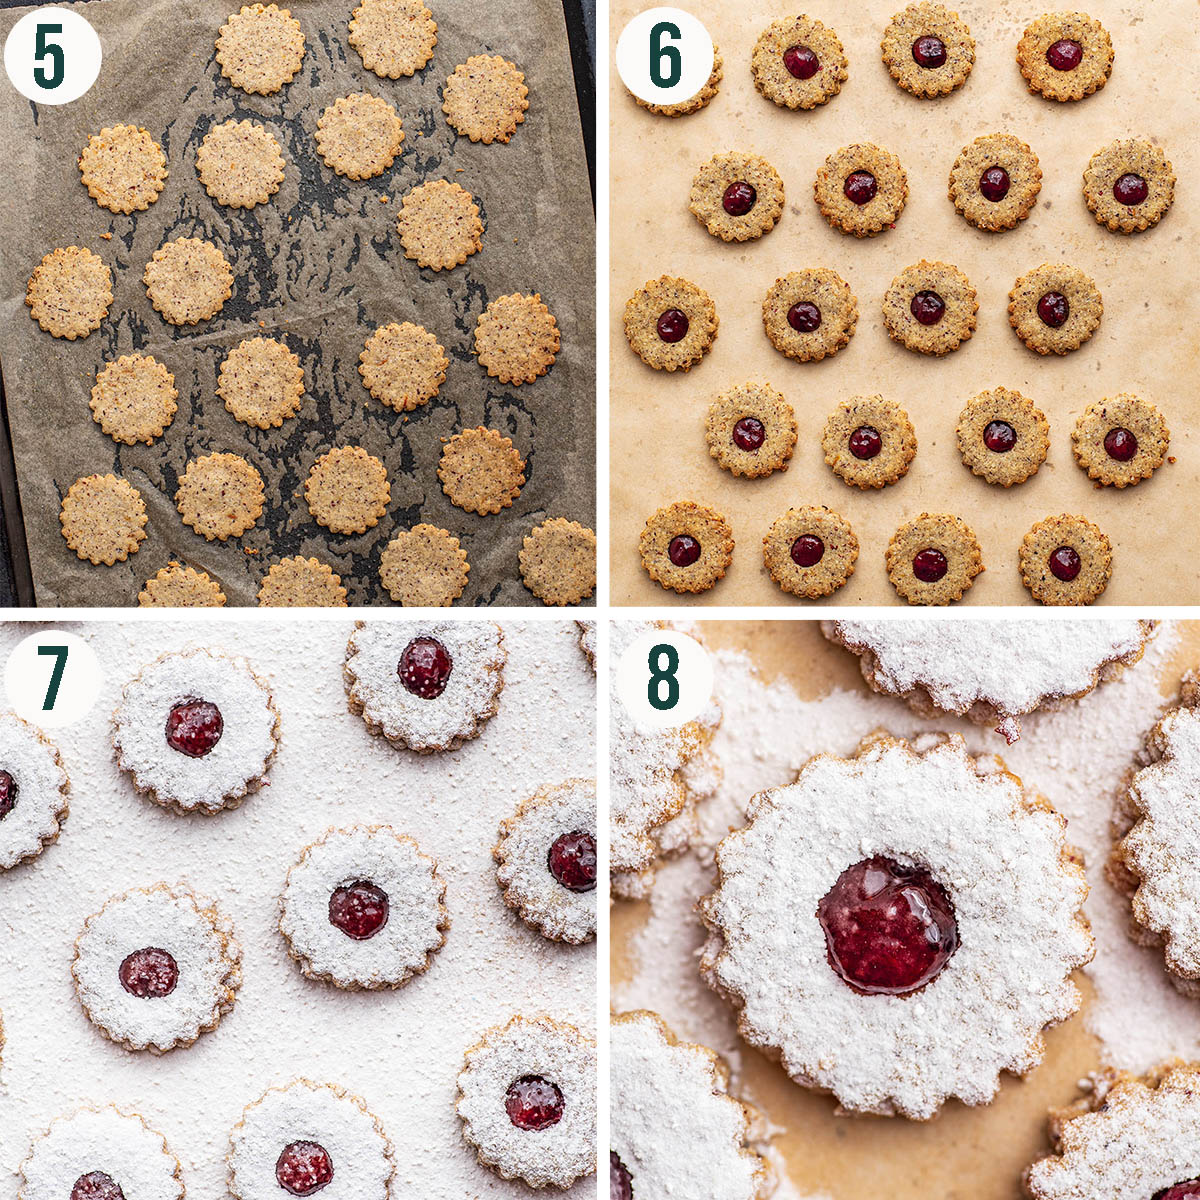 Linzer cookies steps 5 to 8, after baking, sandwiched, and topped with icing sugar.